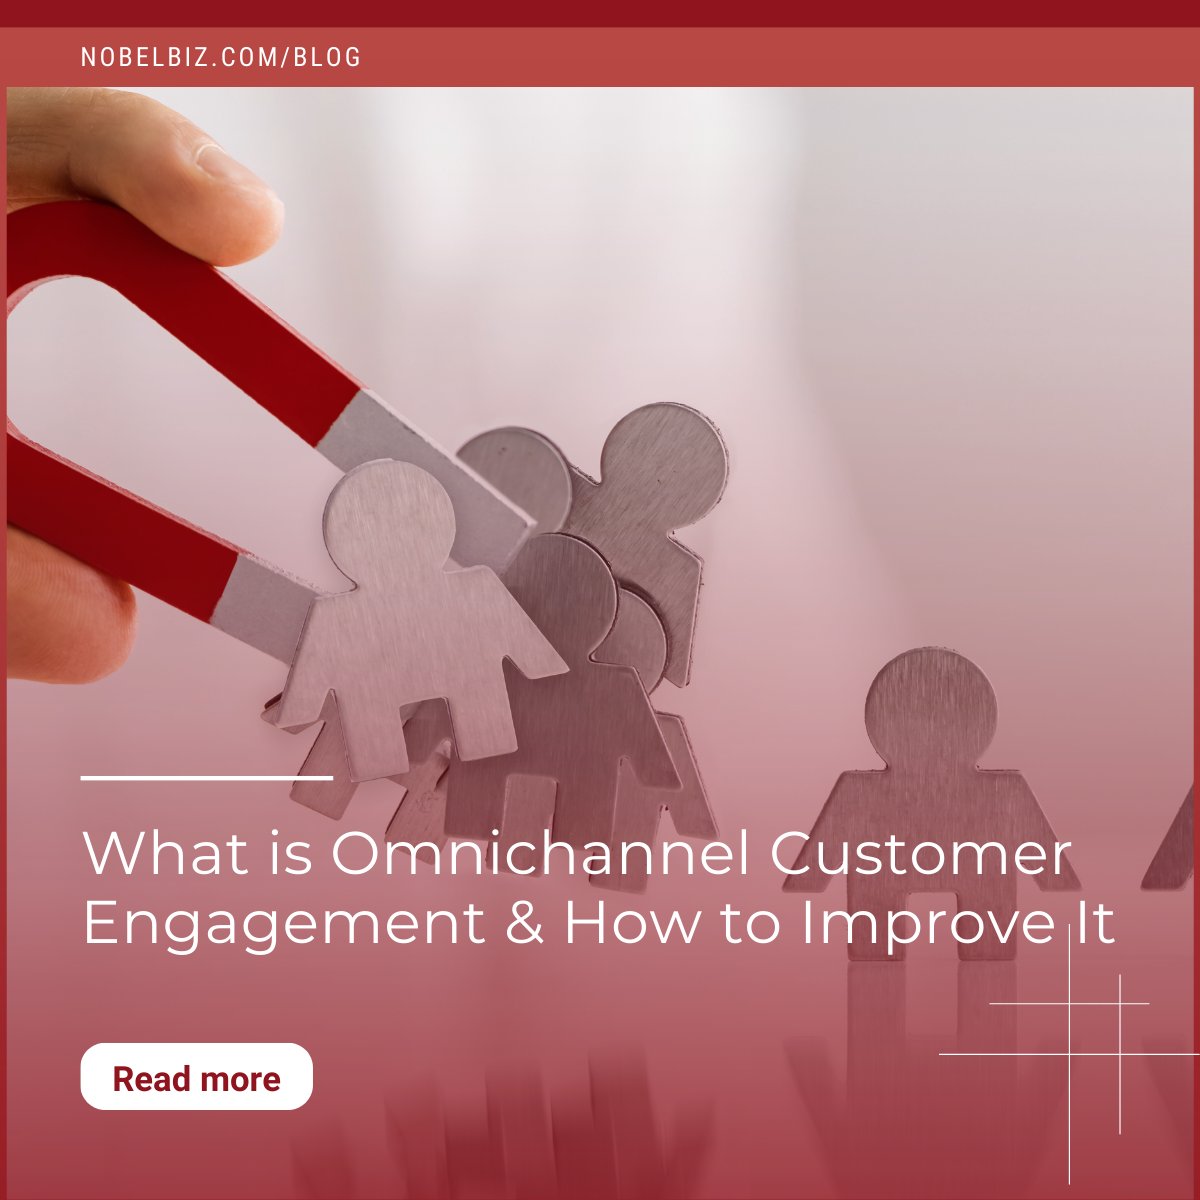 🌟 Step into the world of Omnichannel Customer Engagement with our latest article!
Discover the art of engaging customers seamlessly across multiple platforms, from social media to in-person interactions 
bit.ly/4aXnXQt

#OmnichannelEngagement